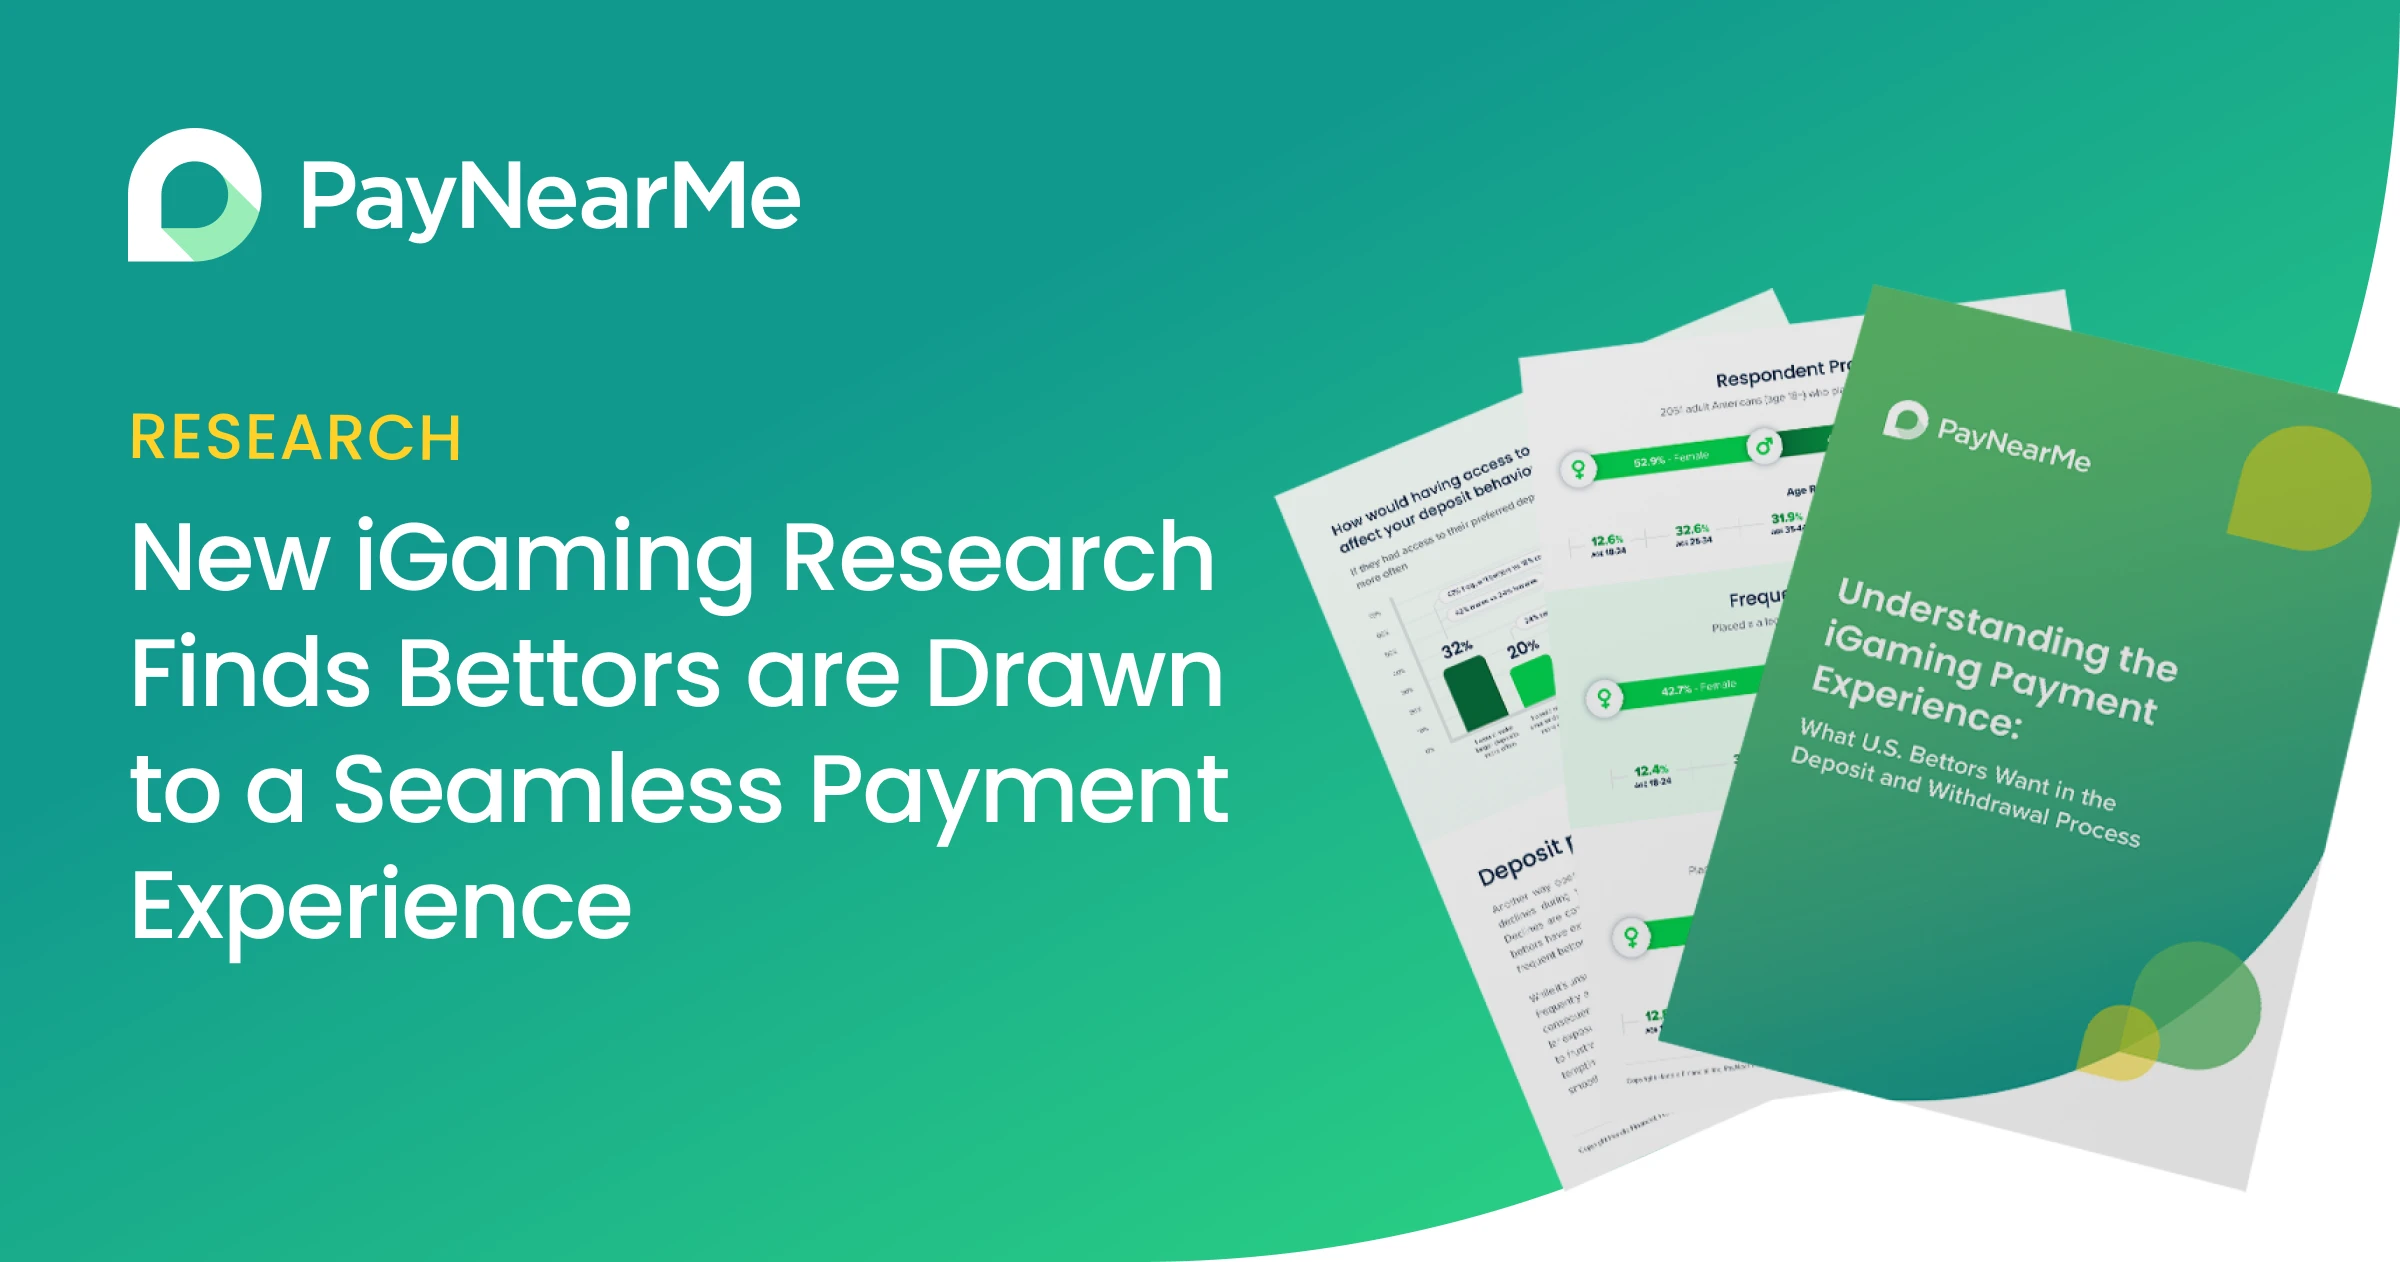 New iGaming Research Finds Bettors are Drawn to a Seamless Payment Experience